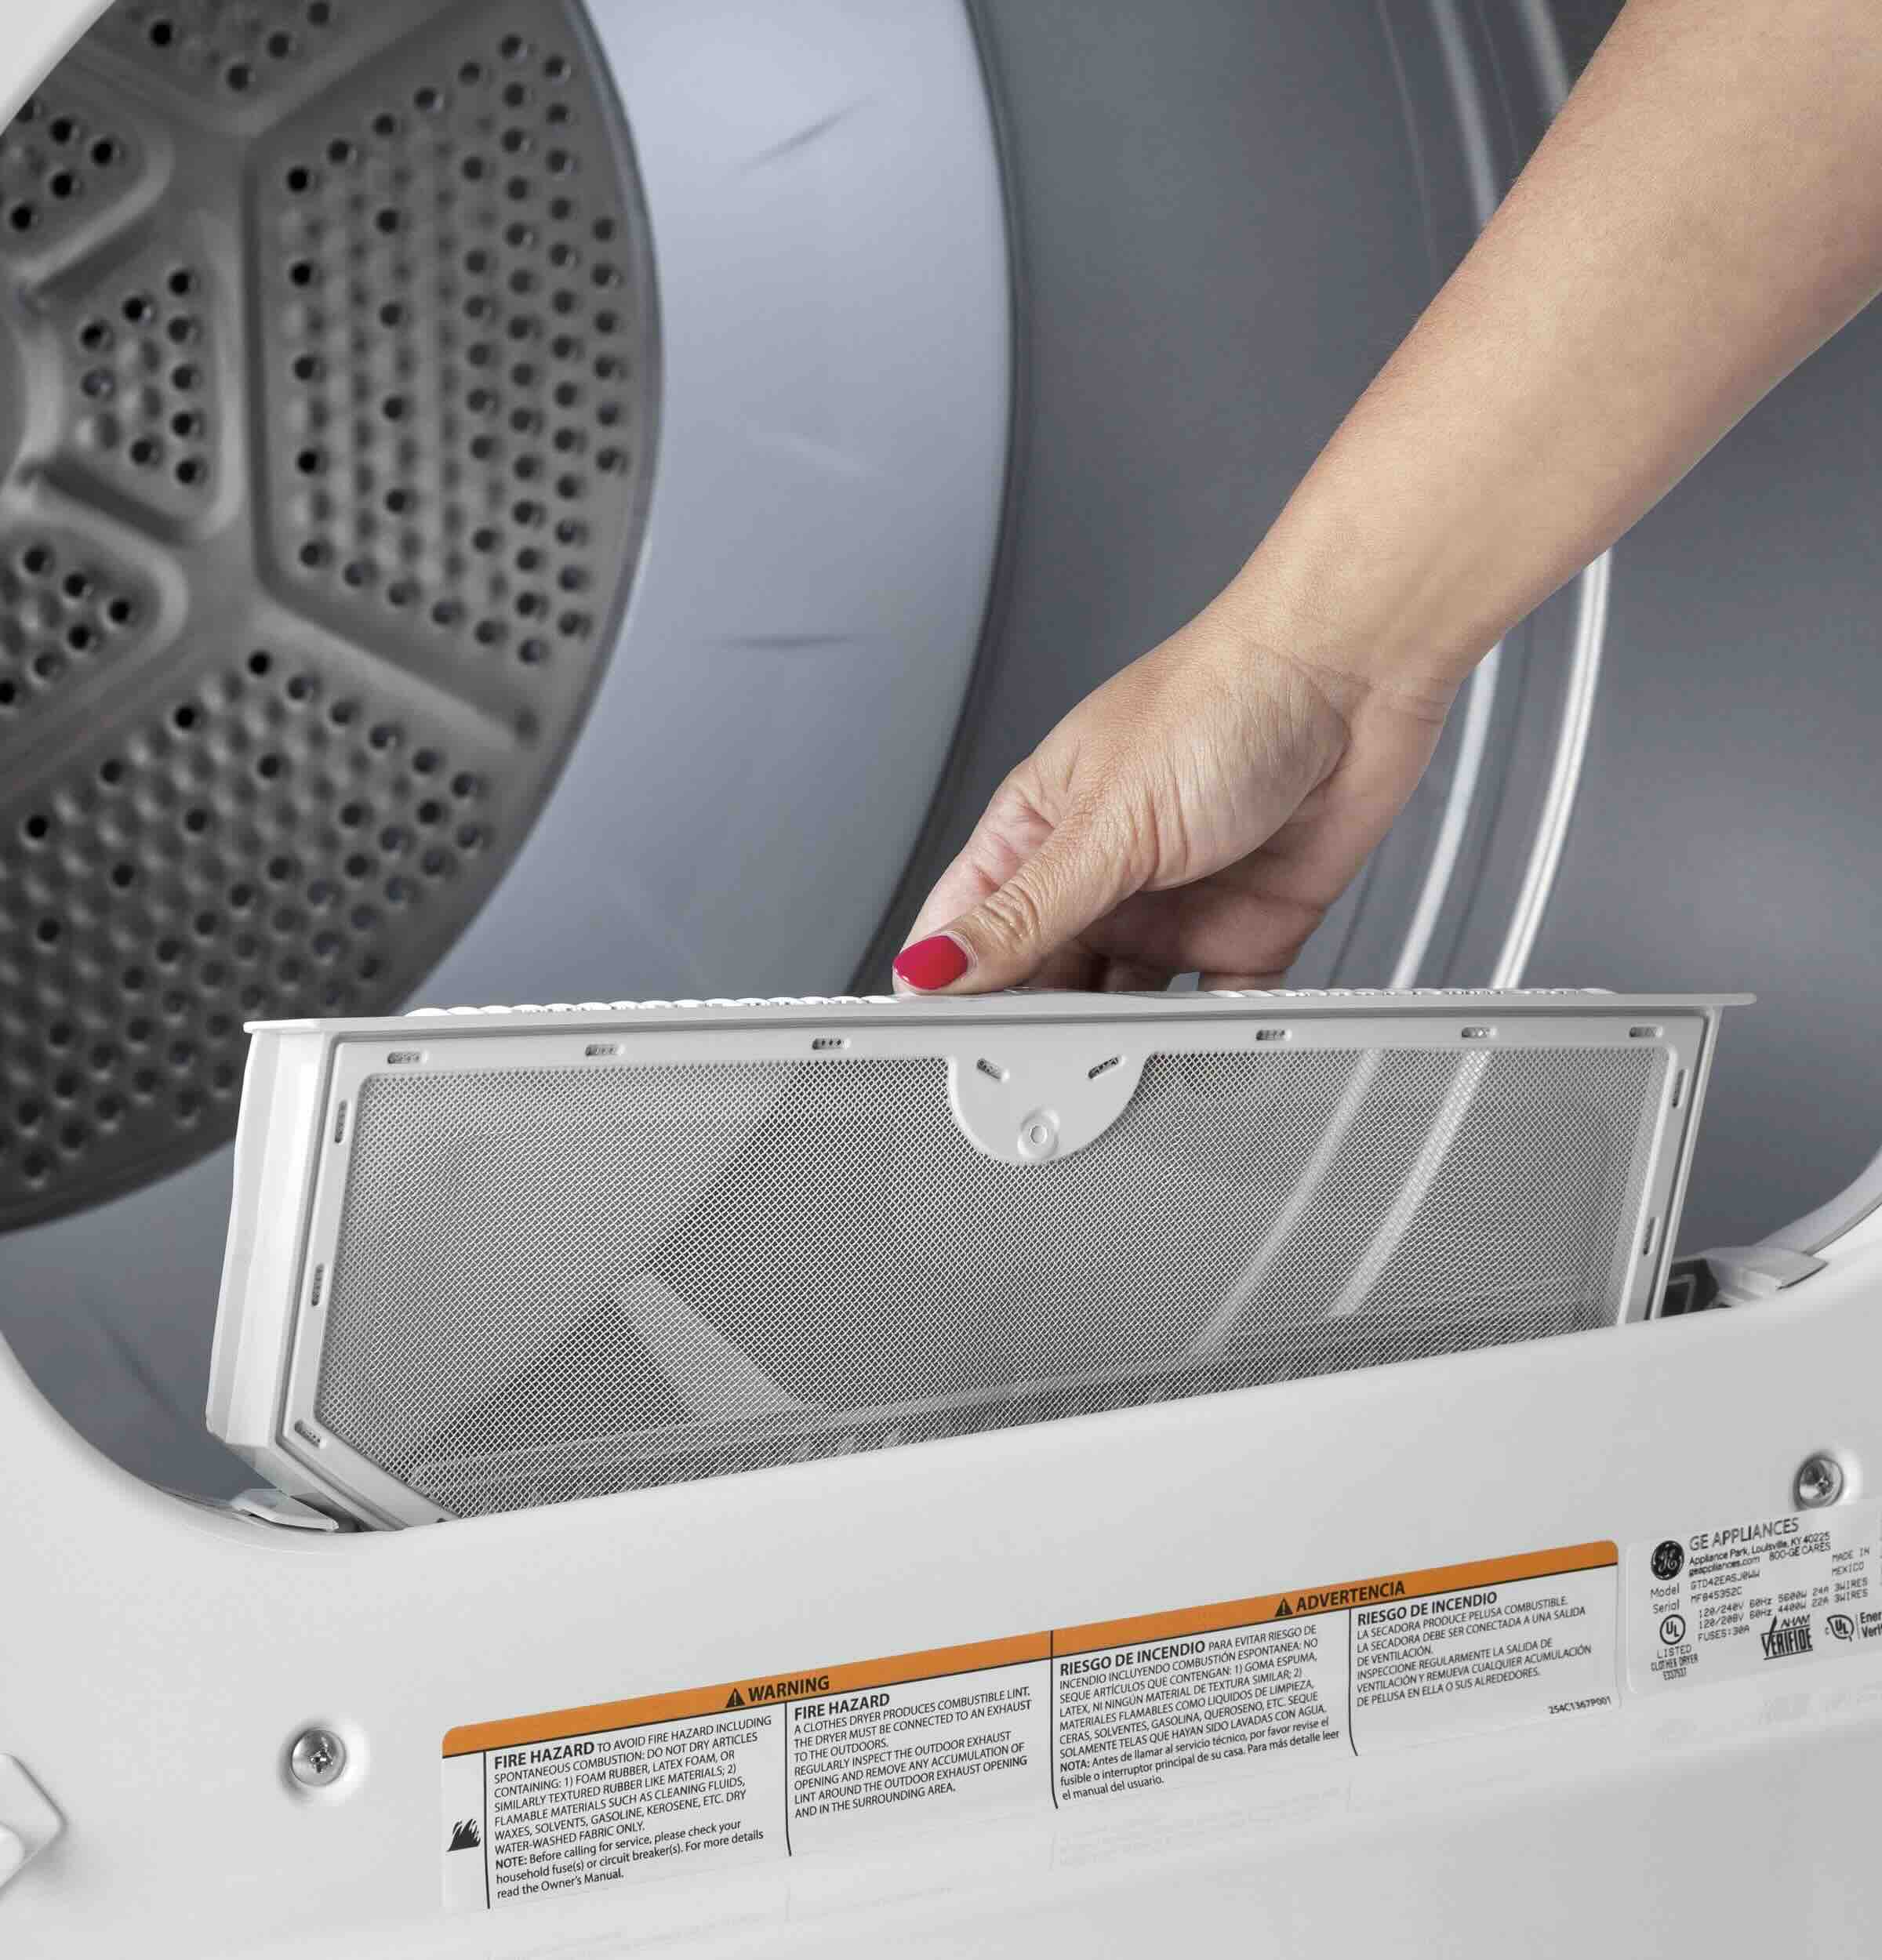 How To Fix The Error Code DEt For GE Dryer